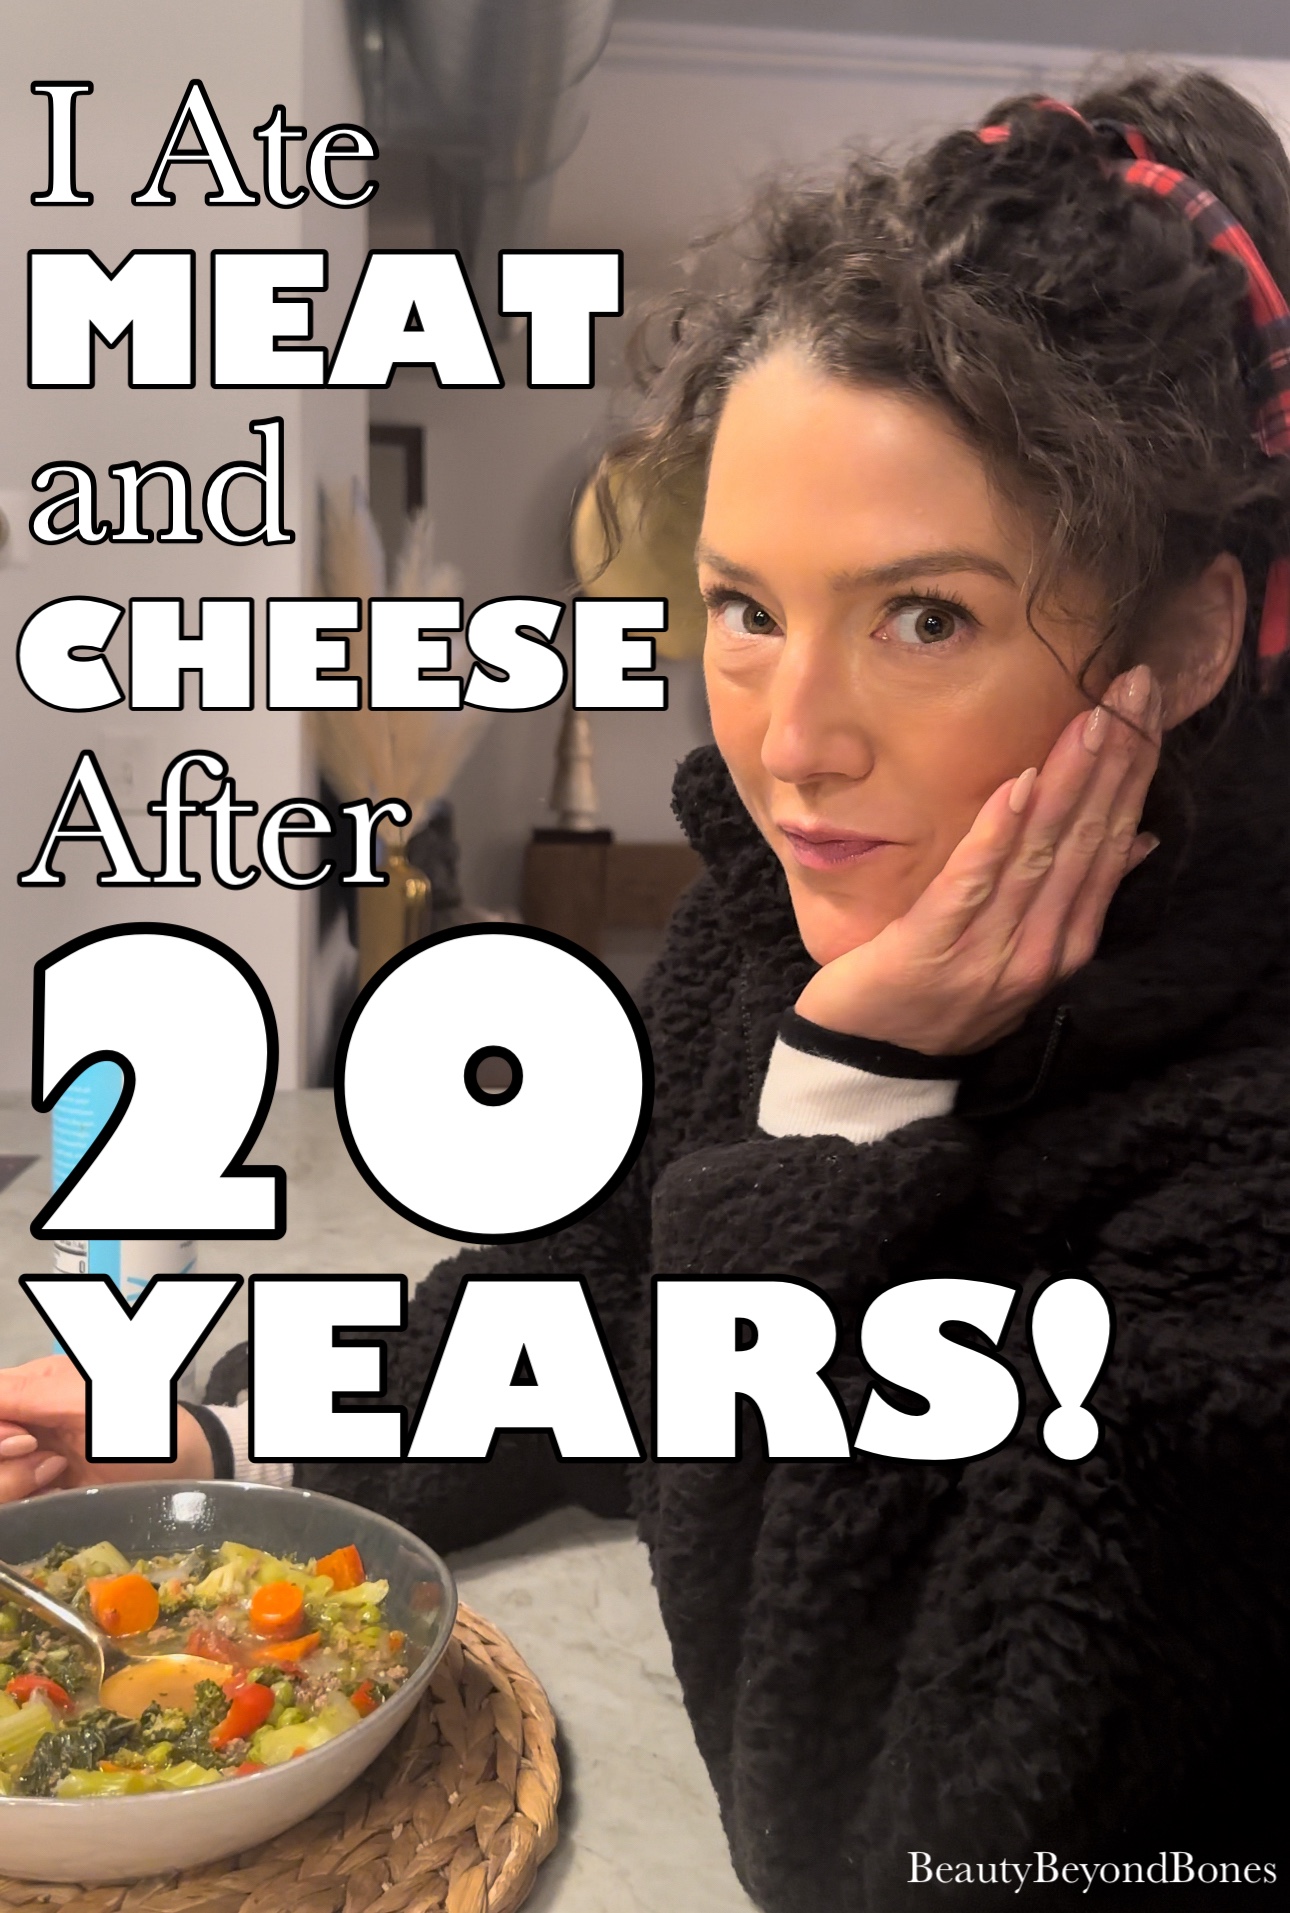 I Ate Meat and Cheese After 20 YEARS!